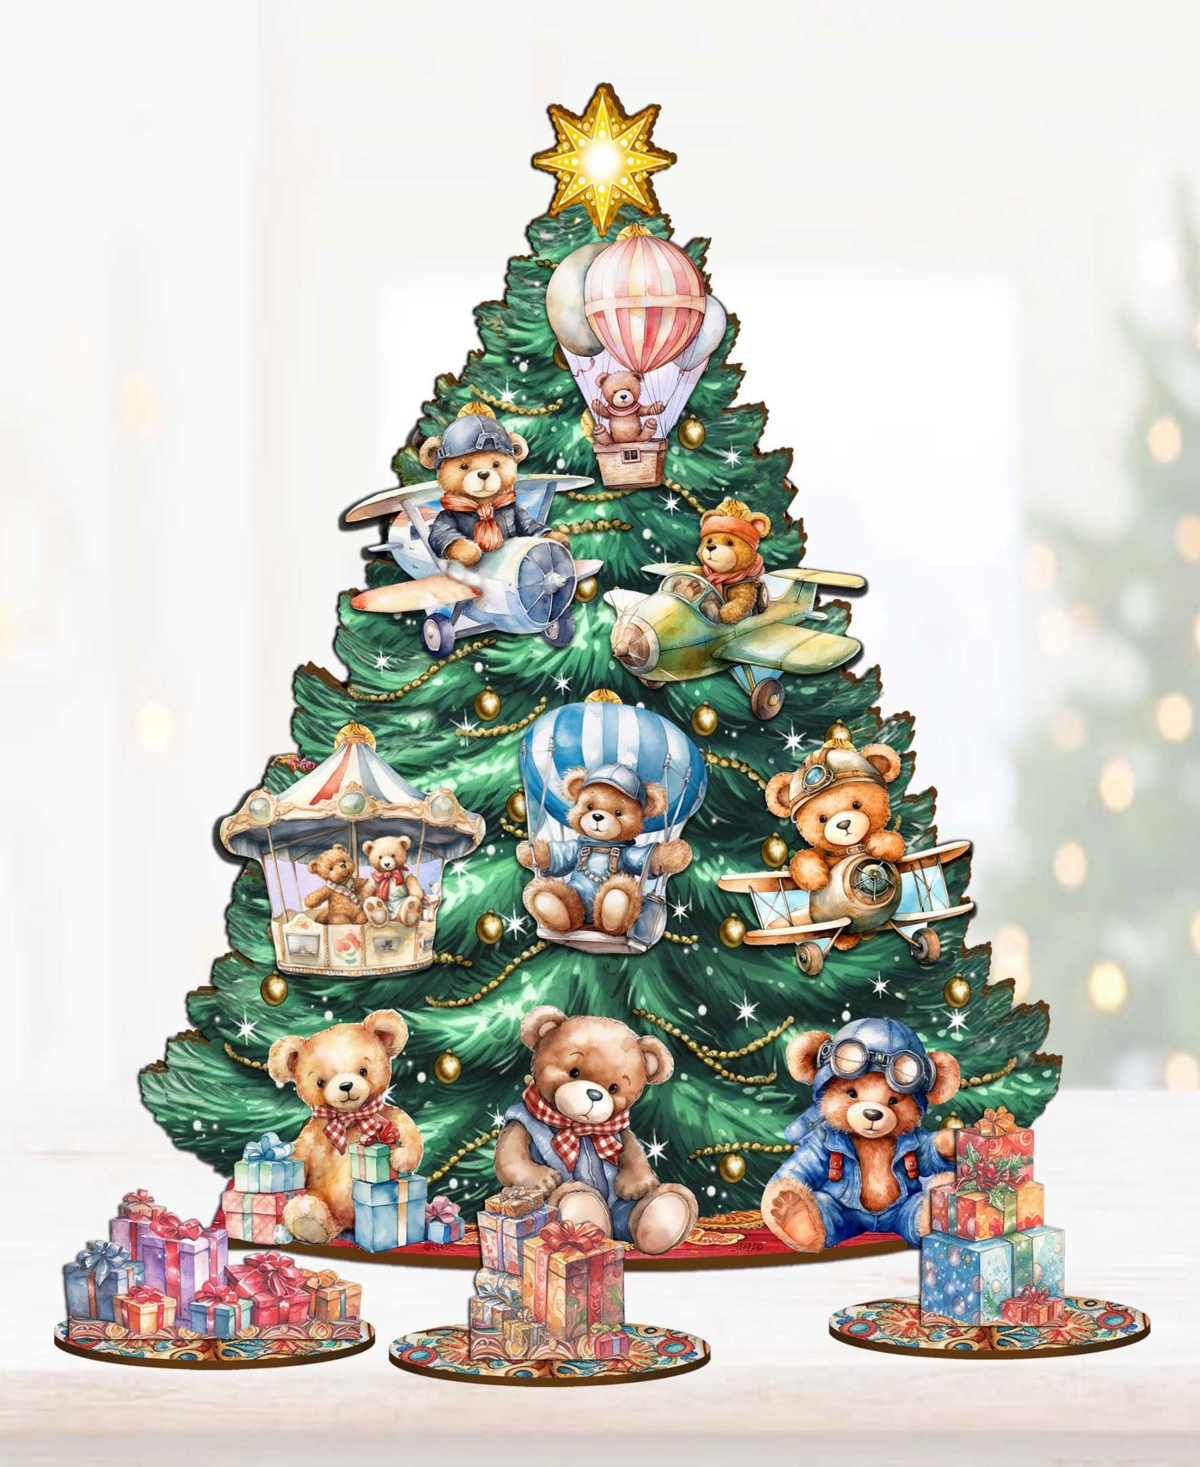 Shop Designocracy Teddy Bears Themed Wooden Christmas Tree With Ornaments Set Of 13 G. Debrekht In Multi Color